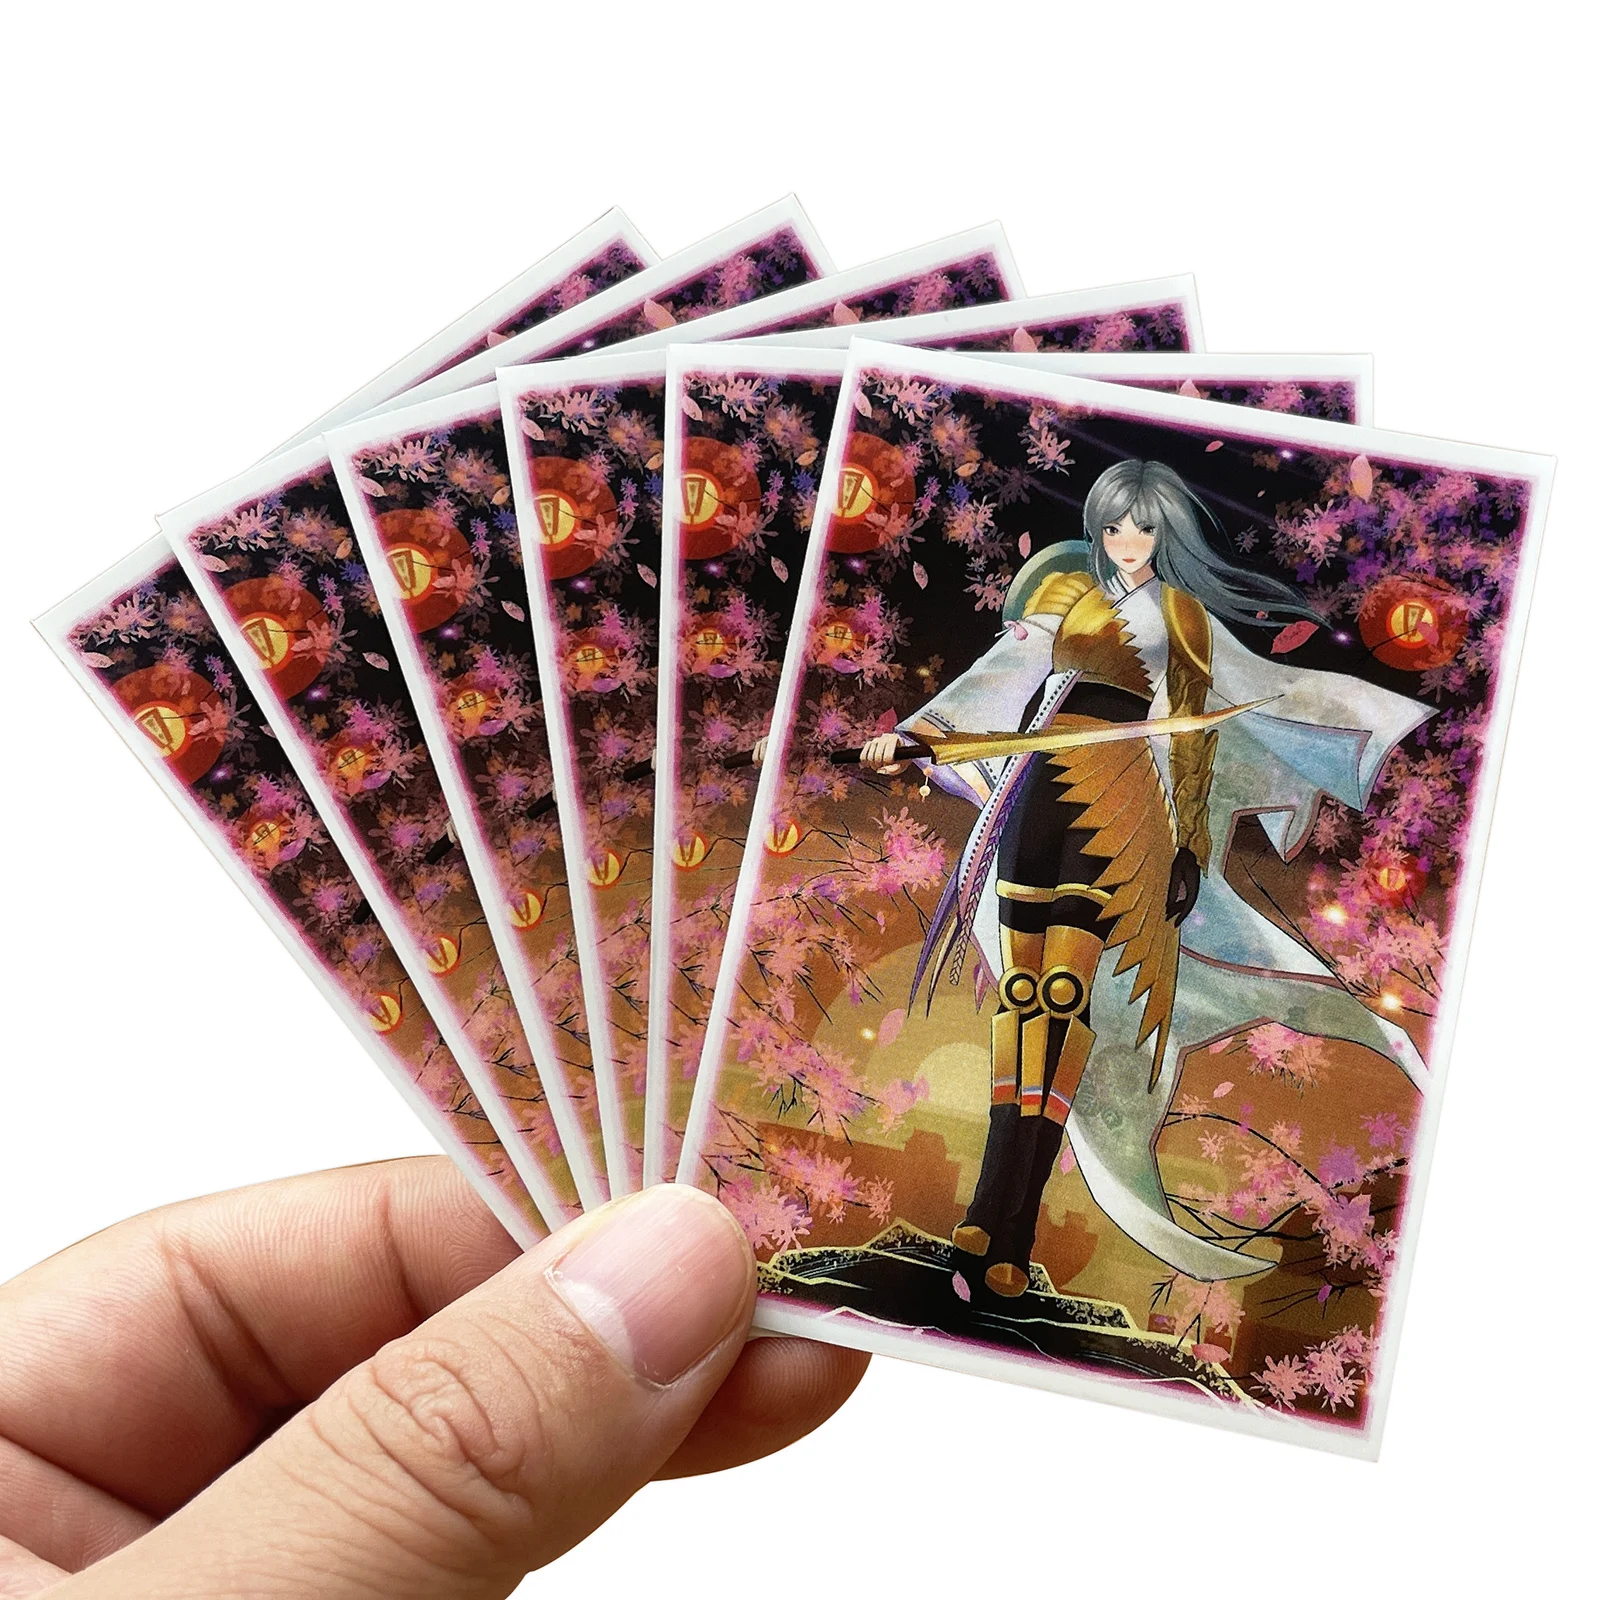 60PCS/BAG TCG Card Sleeves MGT Wandering Emperor Sleeves Game Characters Protector Cards Cover Shield Graphics Color Sleeves PKM 100sheets set index cards 4 x6 brown style message card office note color mash